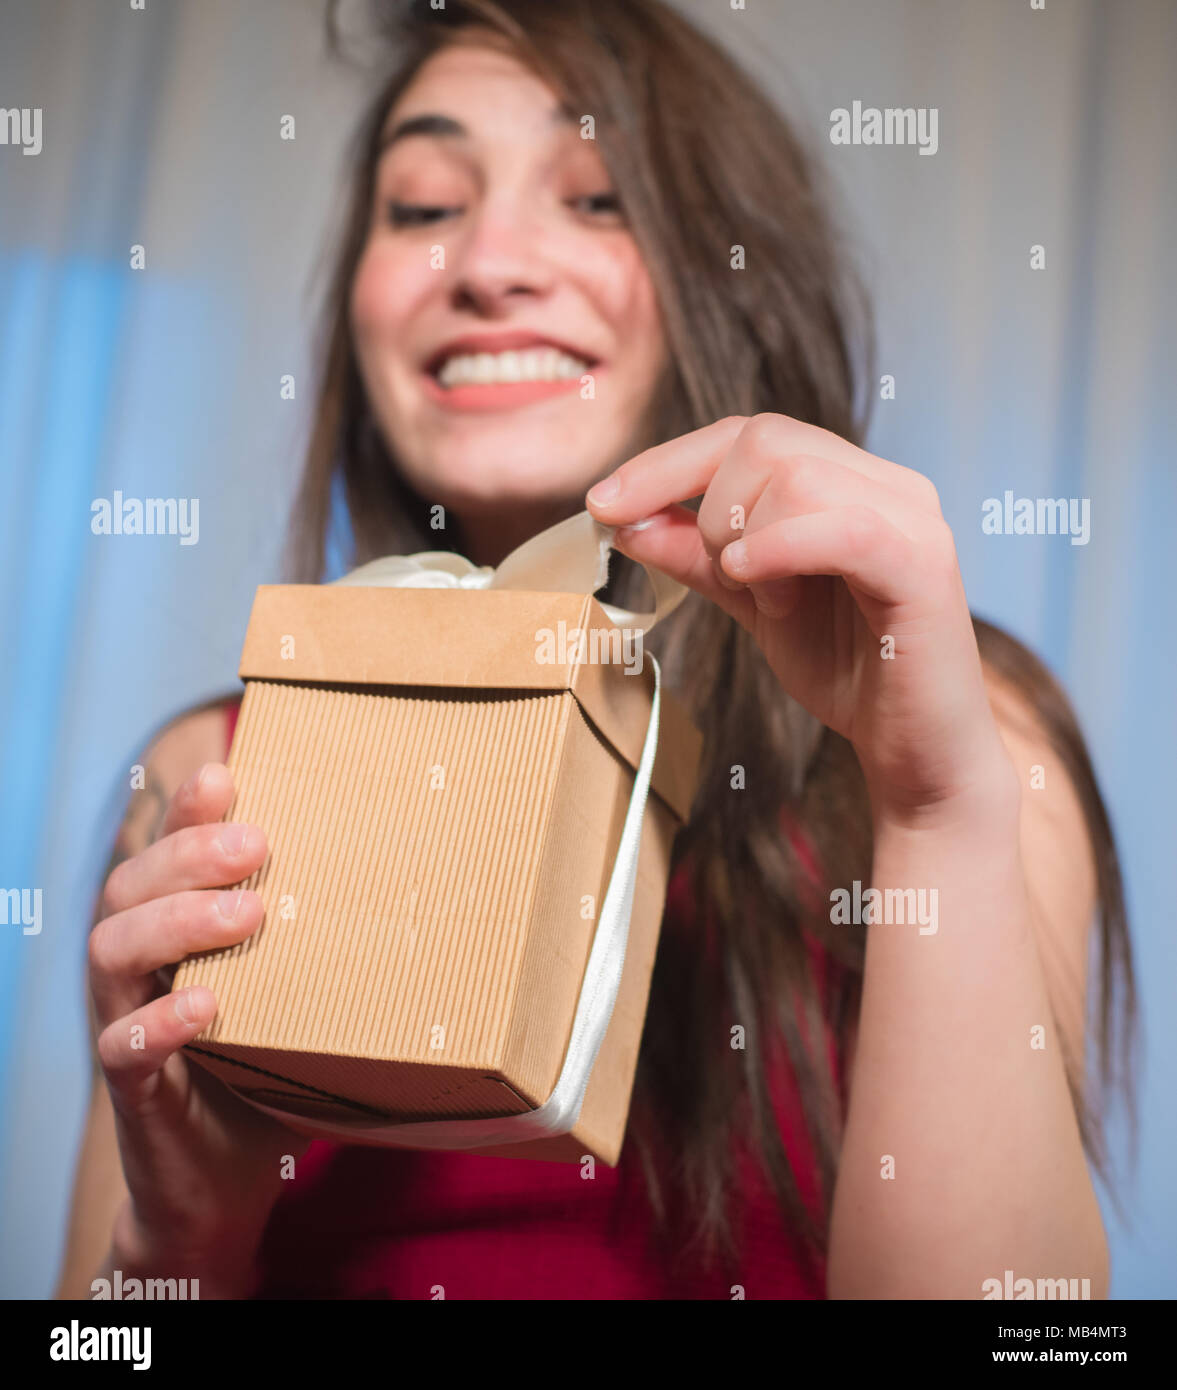 Amazed happy woman opening gift box out of focus in background excited and smiling Stock Photo